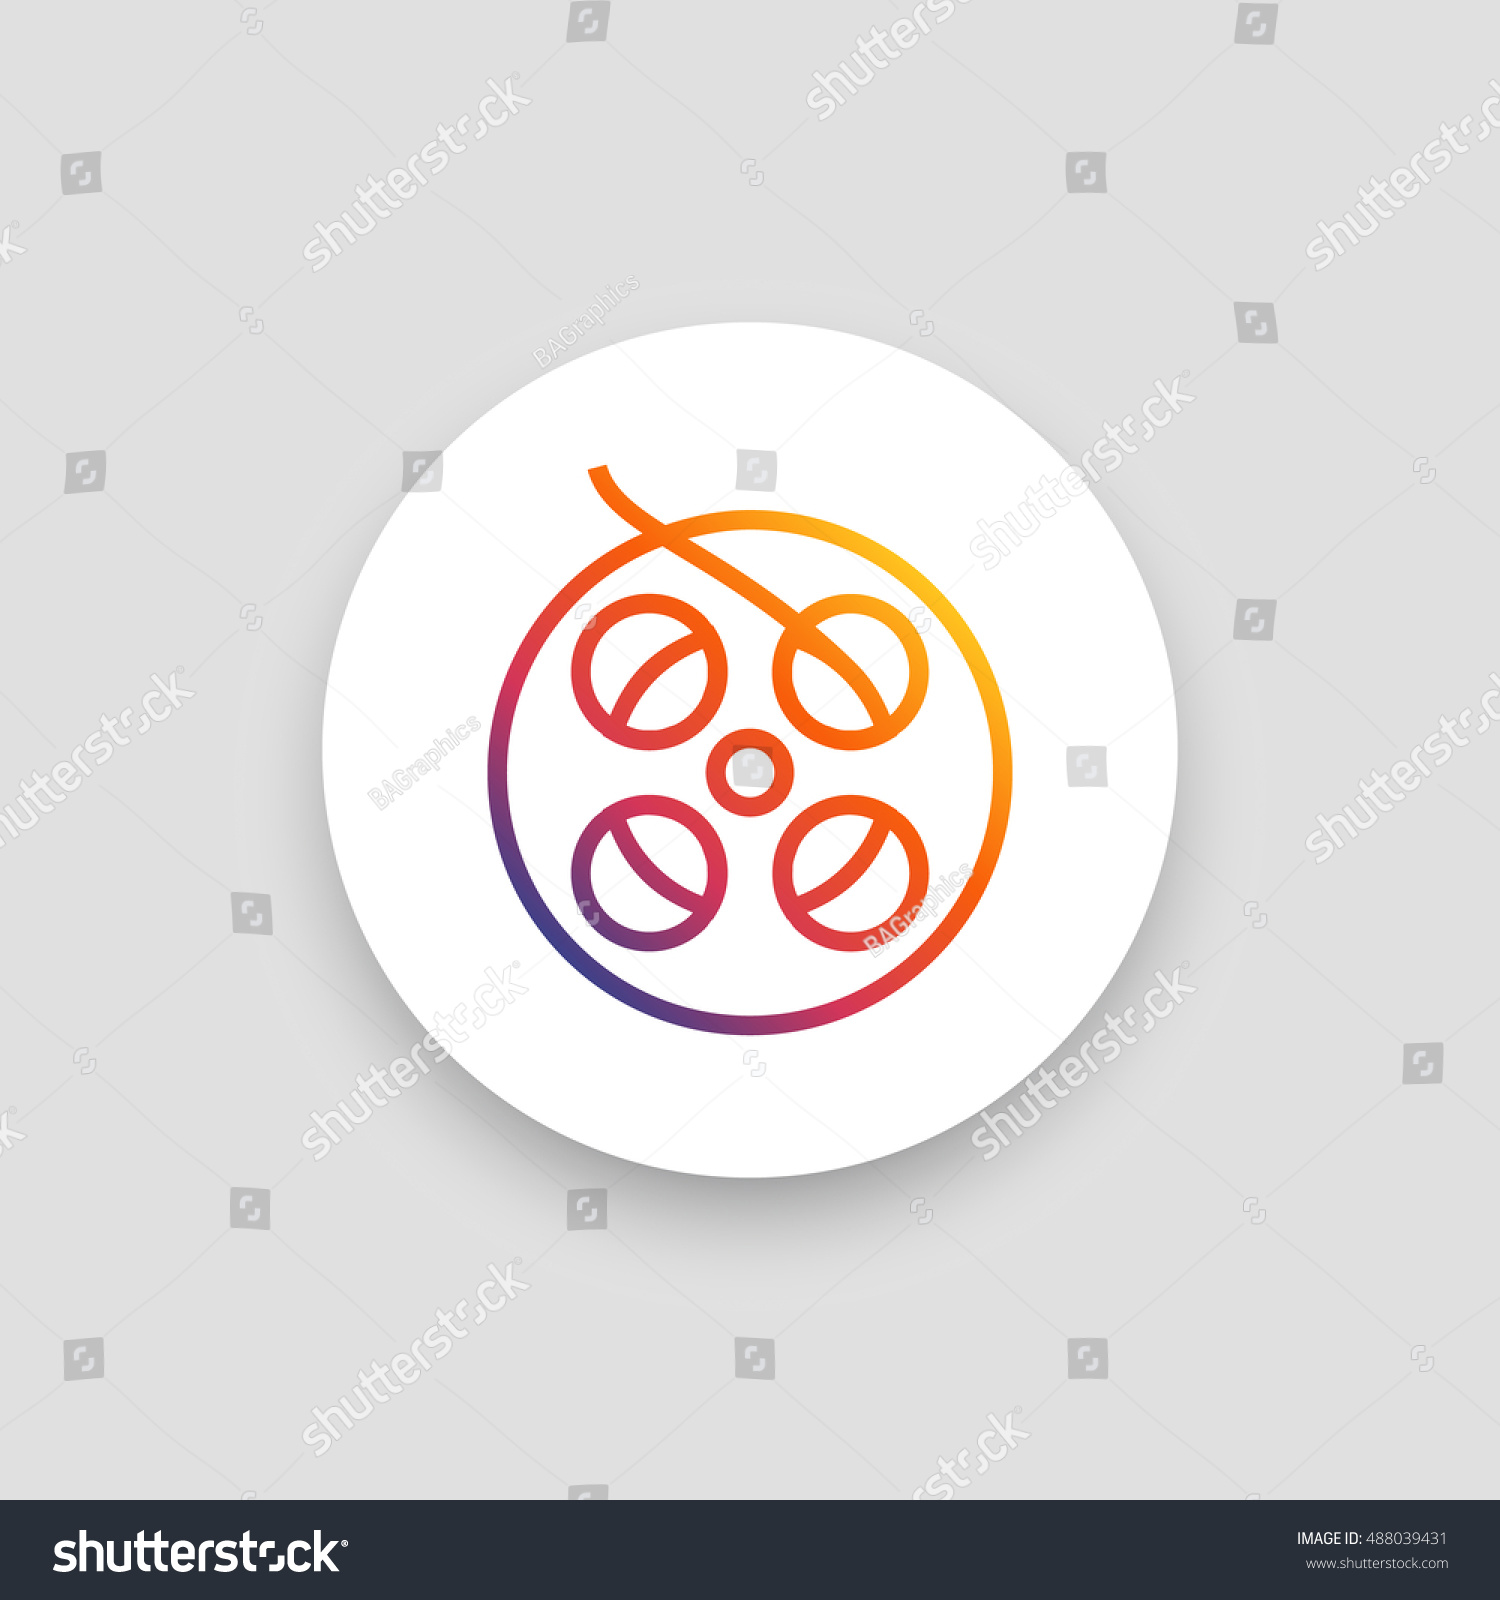 SVG of Film reel icon vector, clip art. Also useful as logo, circle app icon, web UI element, symbol, graphic image, silhouette and illustration. Compatible with ai, cdr, jpg, png, svg, pdf, ico and eps. svg